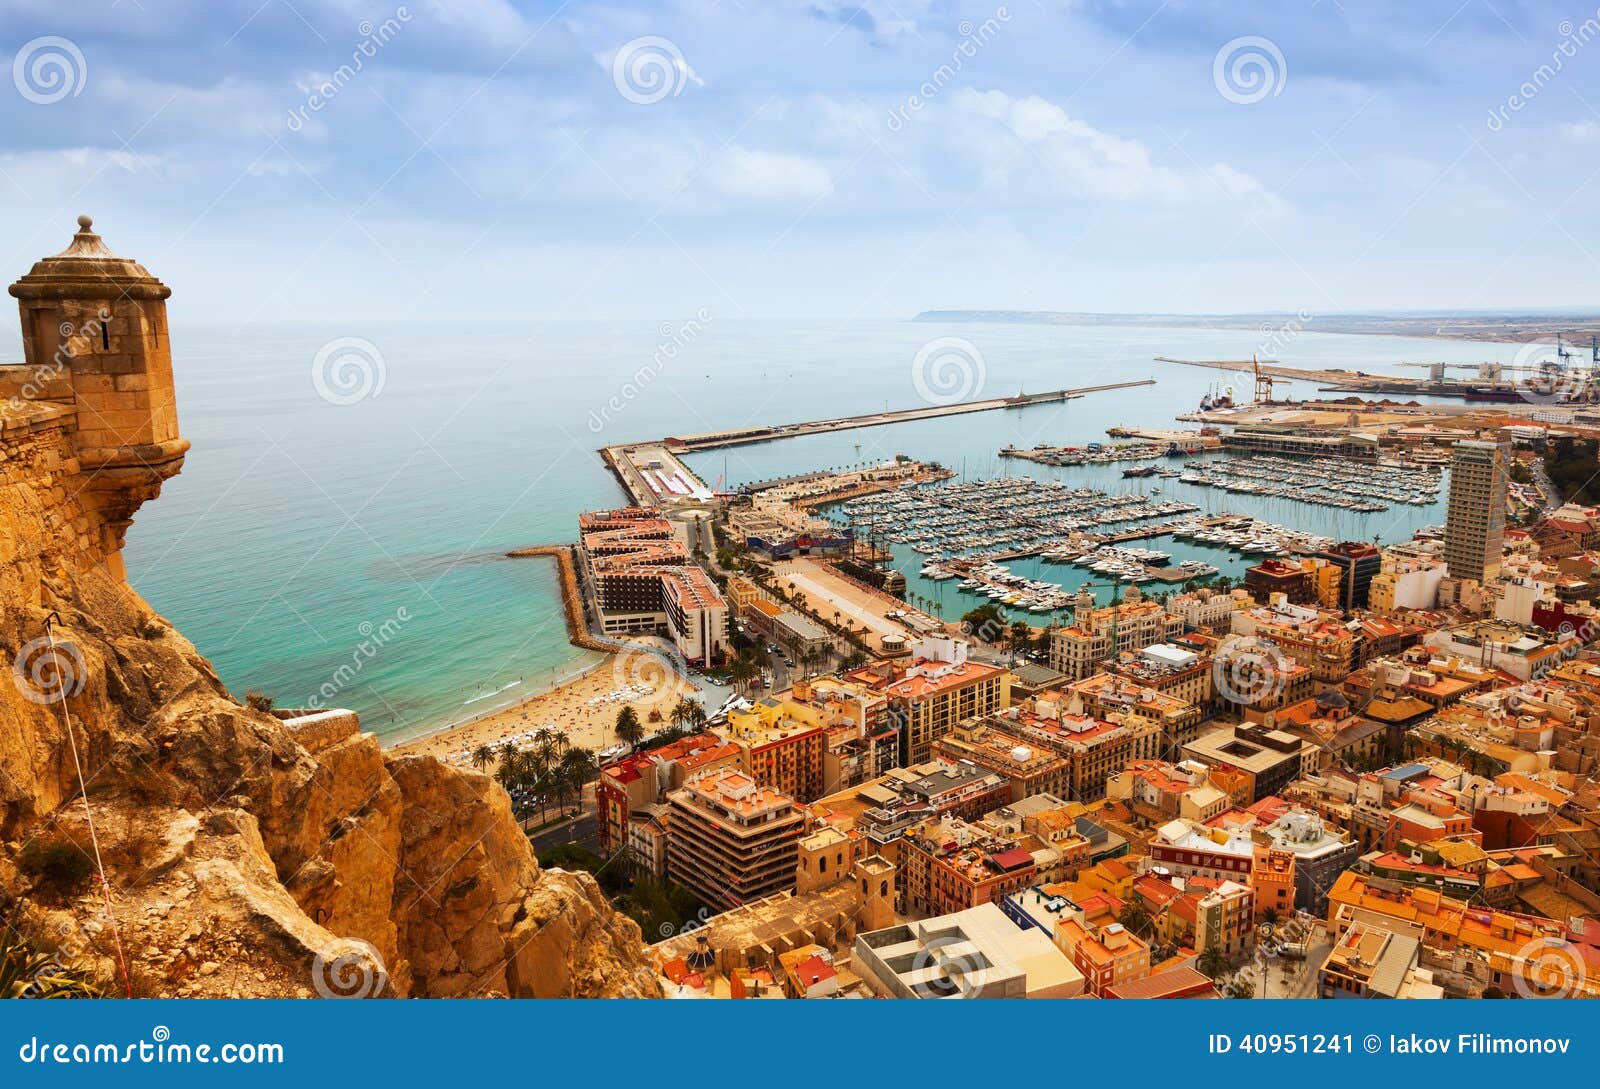 alicante with docked yachts from castle. spain